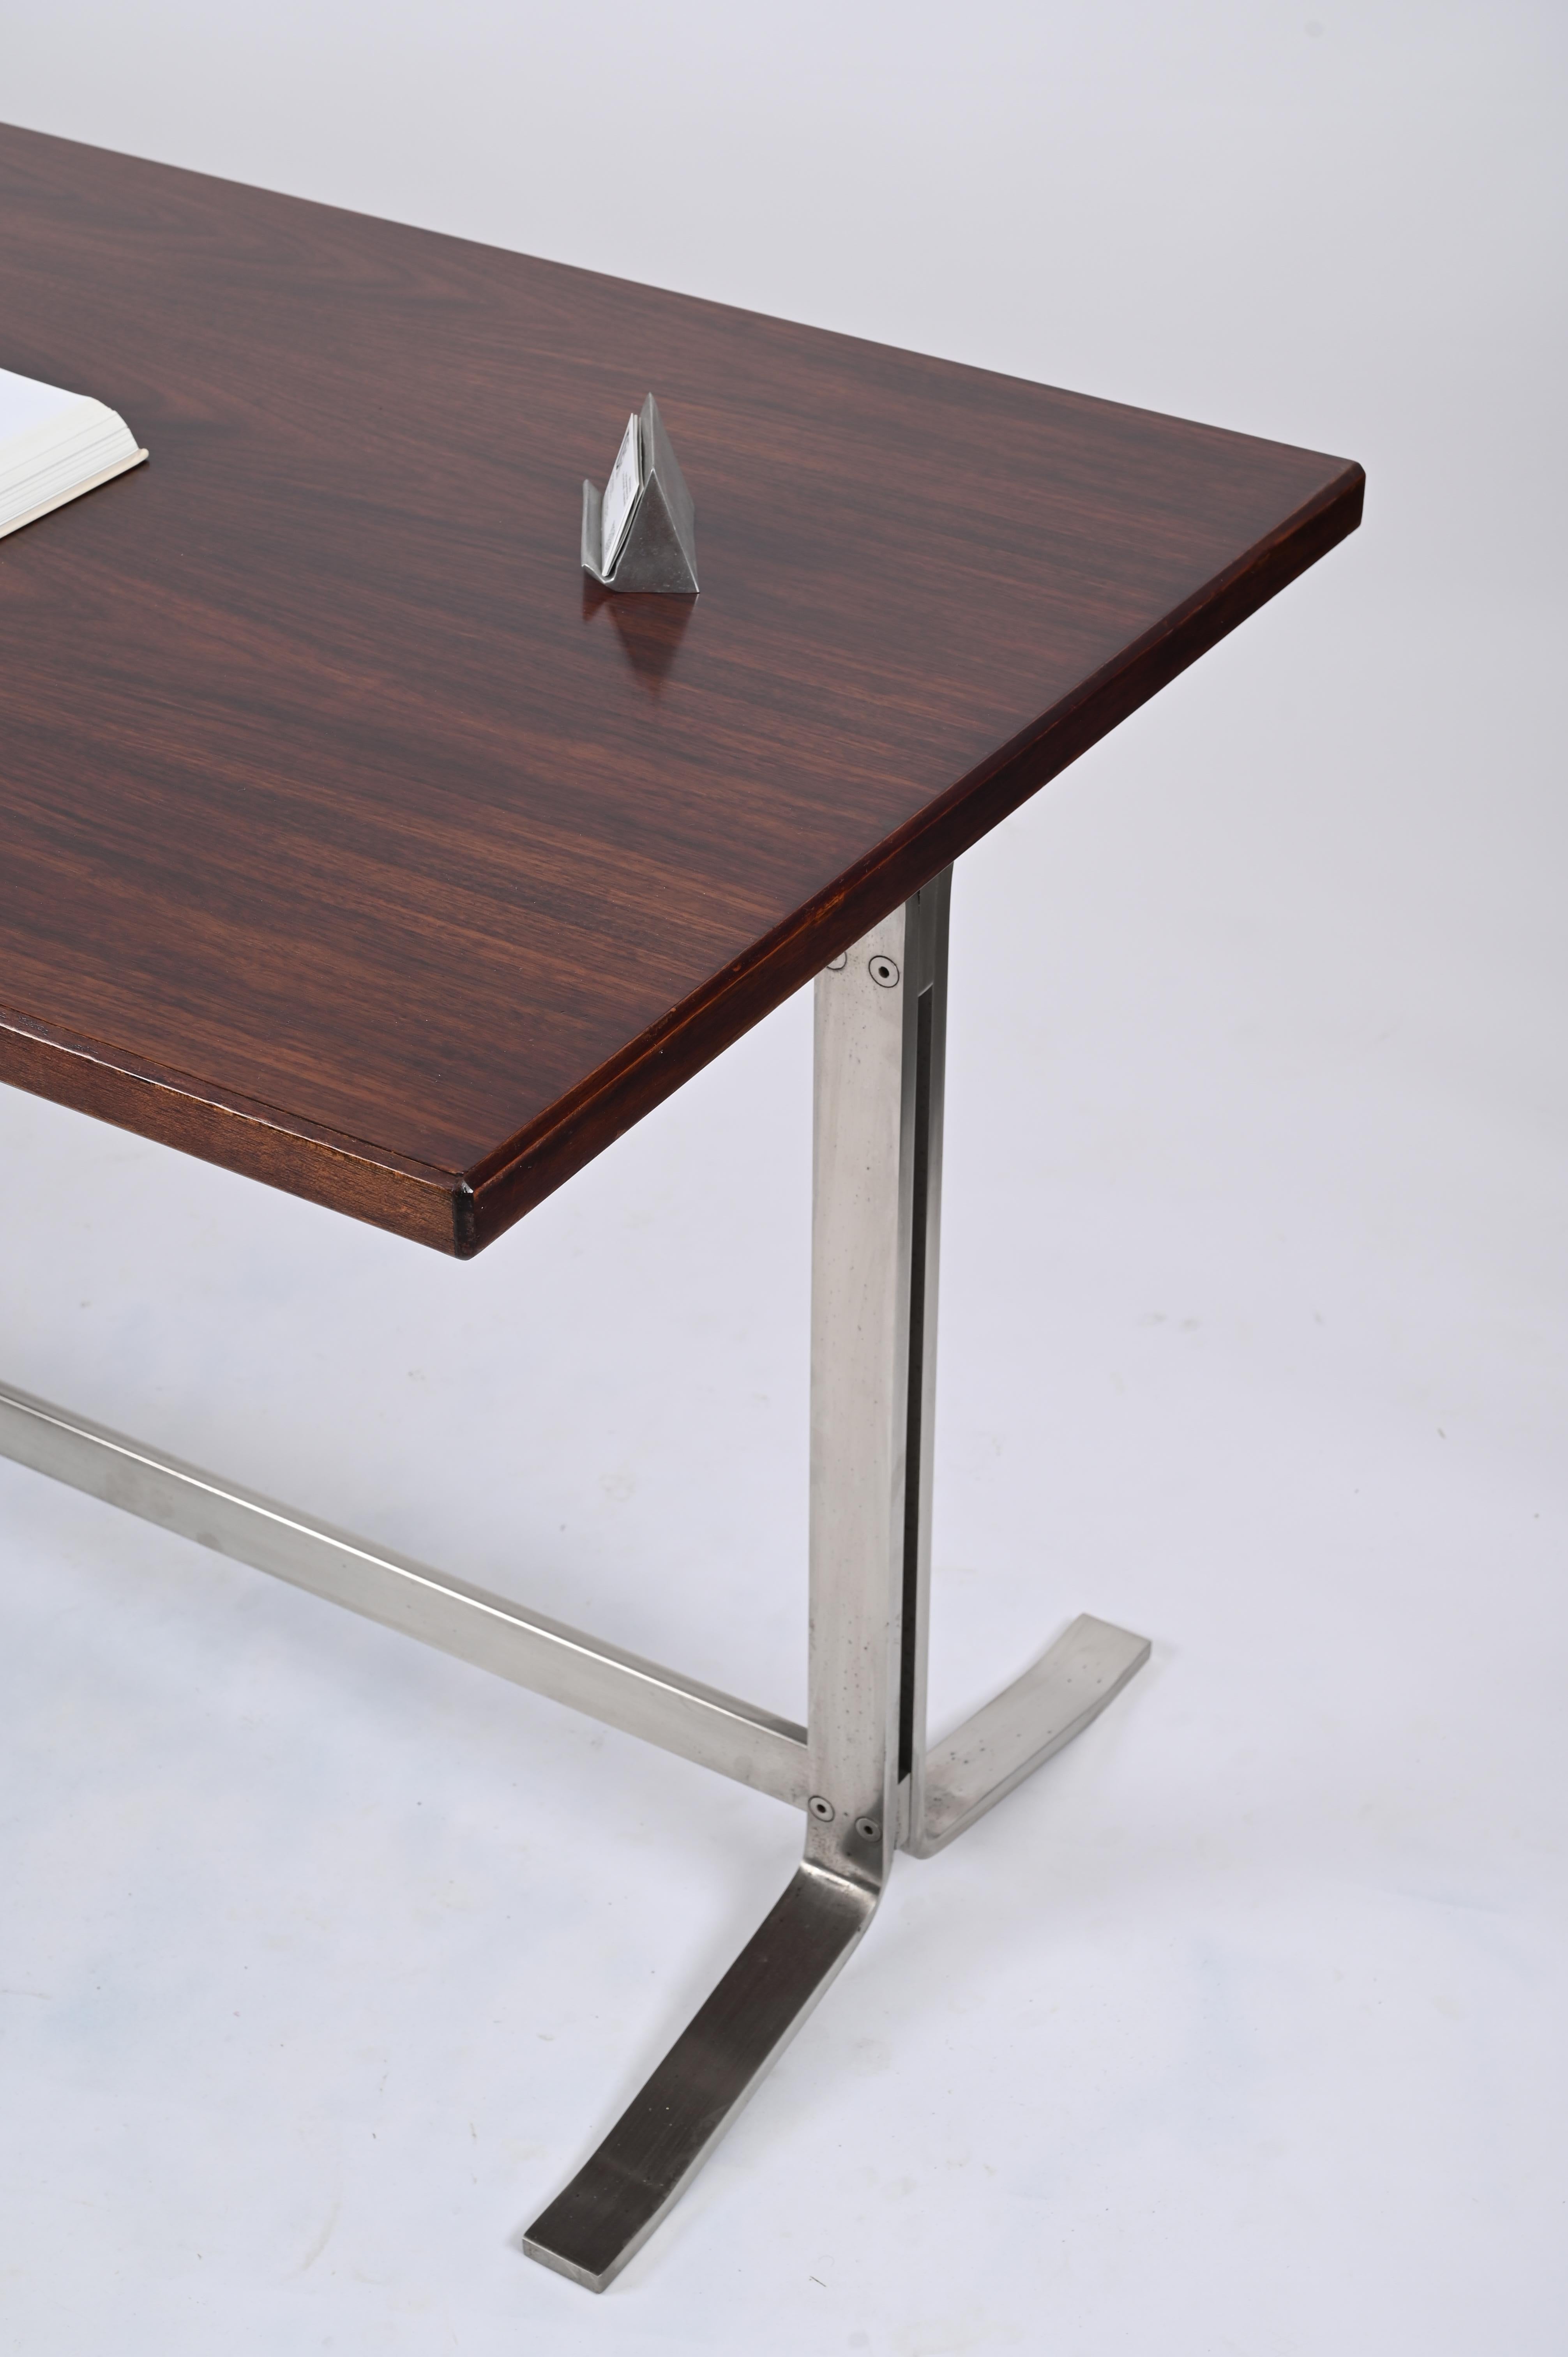 Midcentury Desk in Walnut and Steel by Moscatelli for Formanova, Italy, 1965 For Sale 7